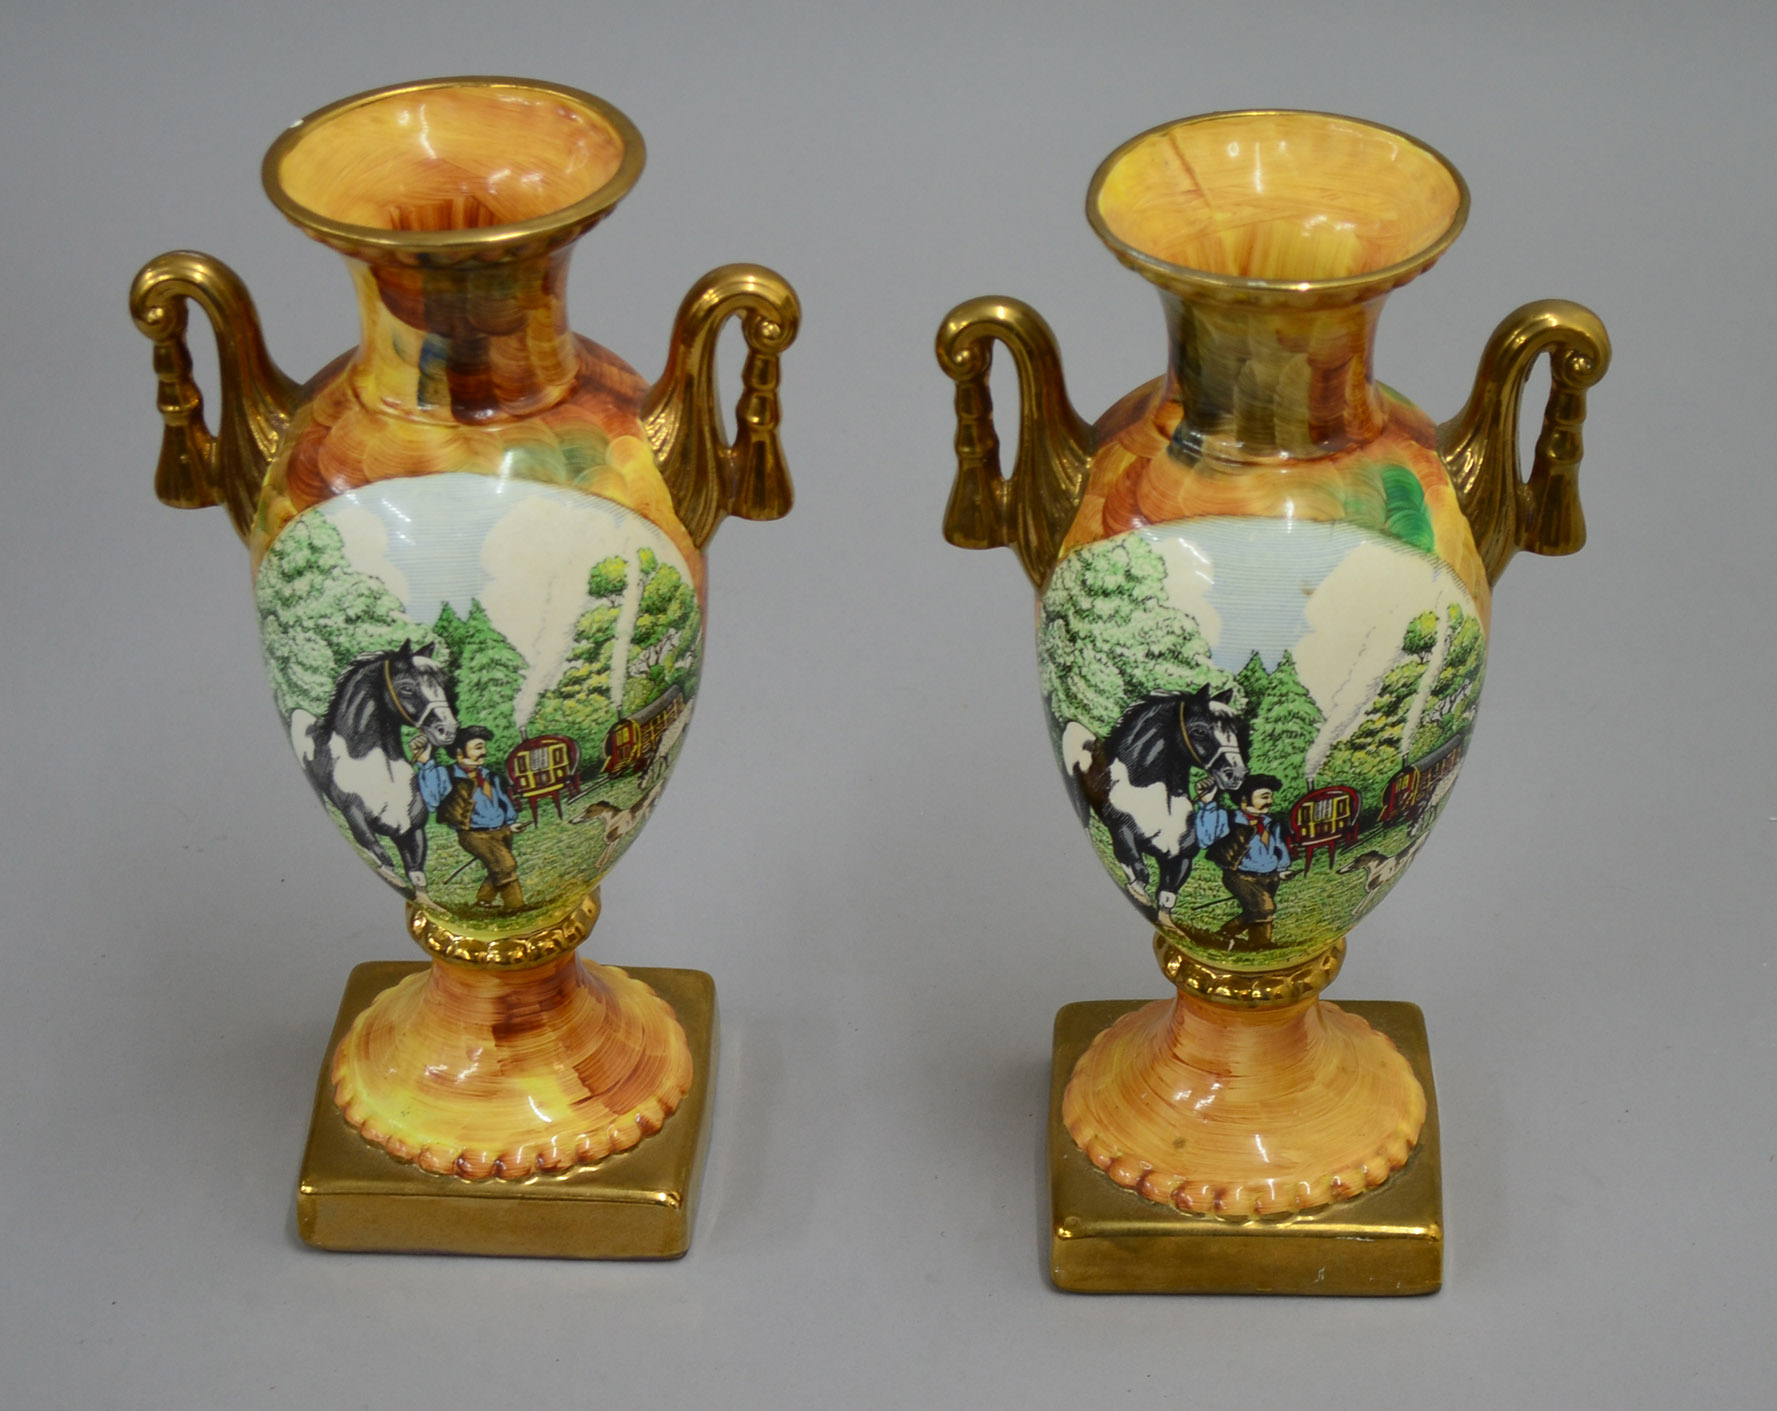 Pair of Hose St. Pottery Tunstall porcelain vases in Classical style with gilding and detail